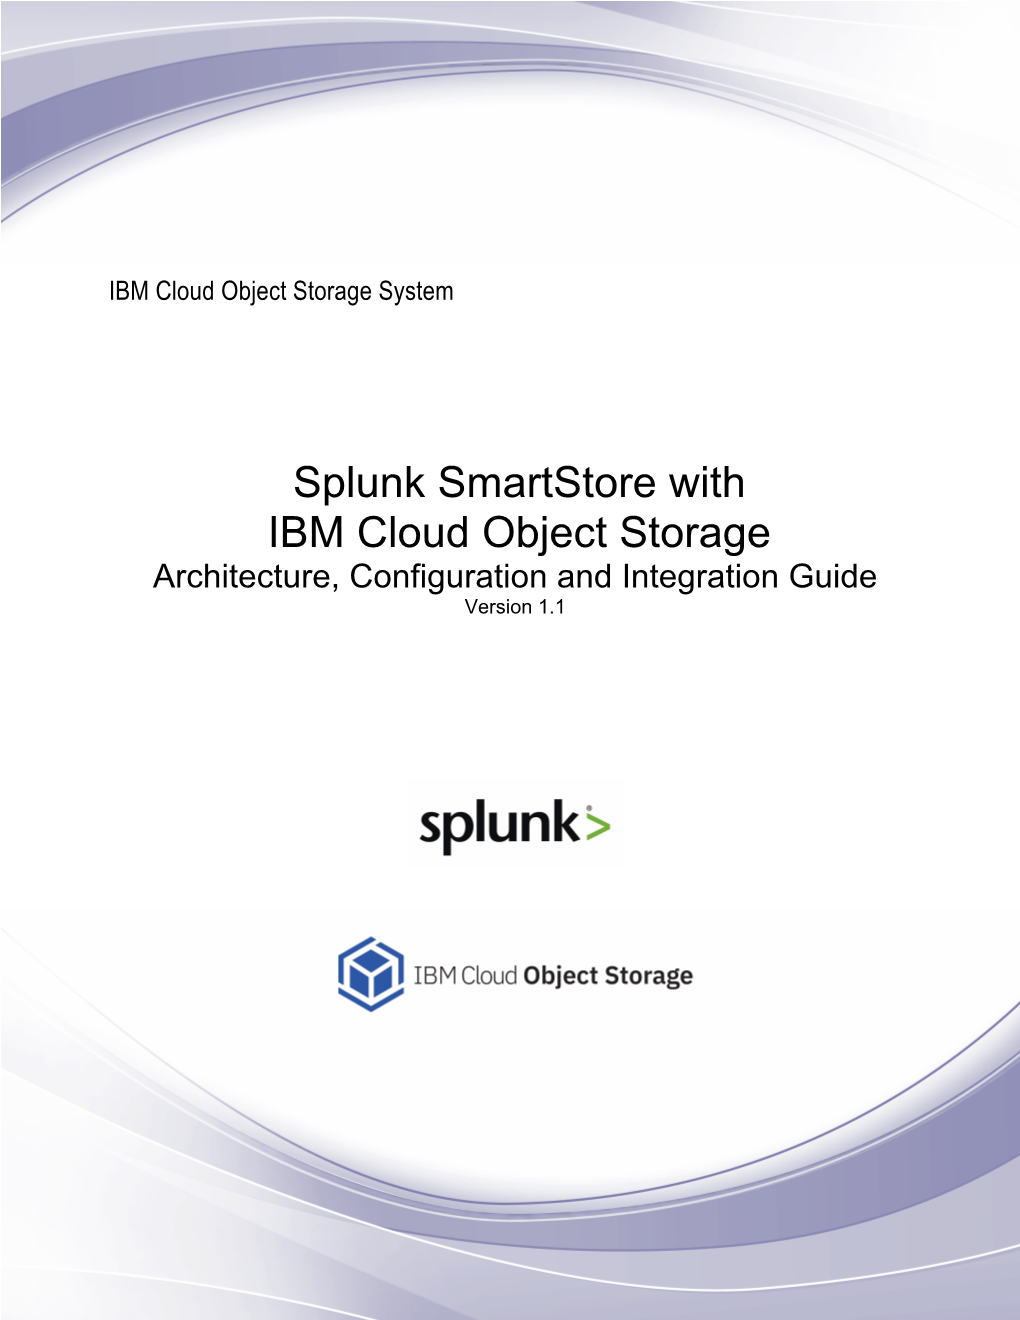 Splunk Smartstore with IBM Cloud Object Storage Architecture, Configuration and Integration Guide Version 1.1